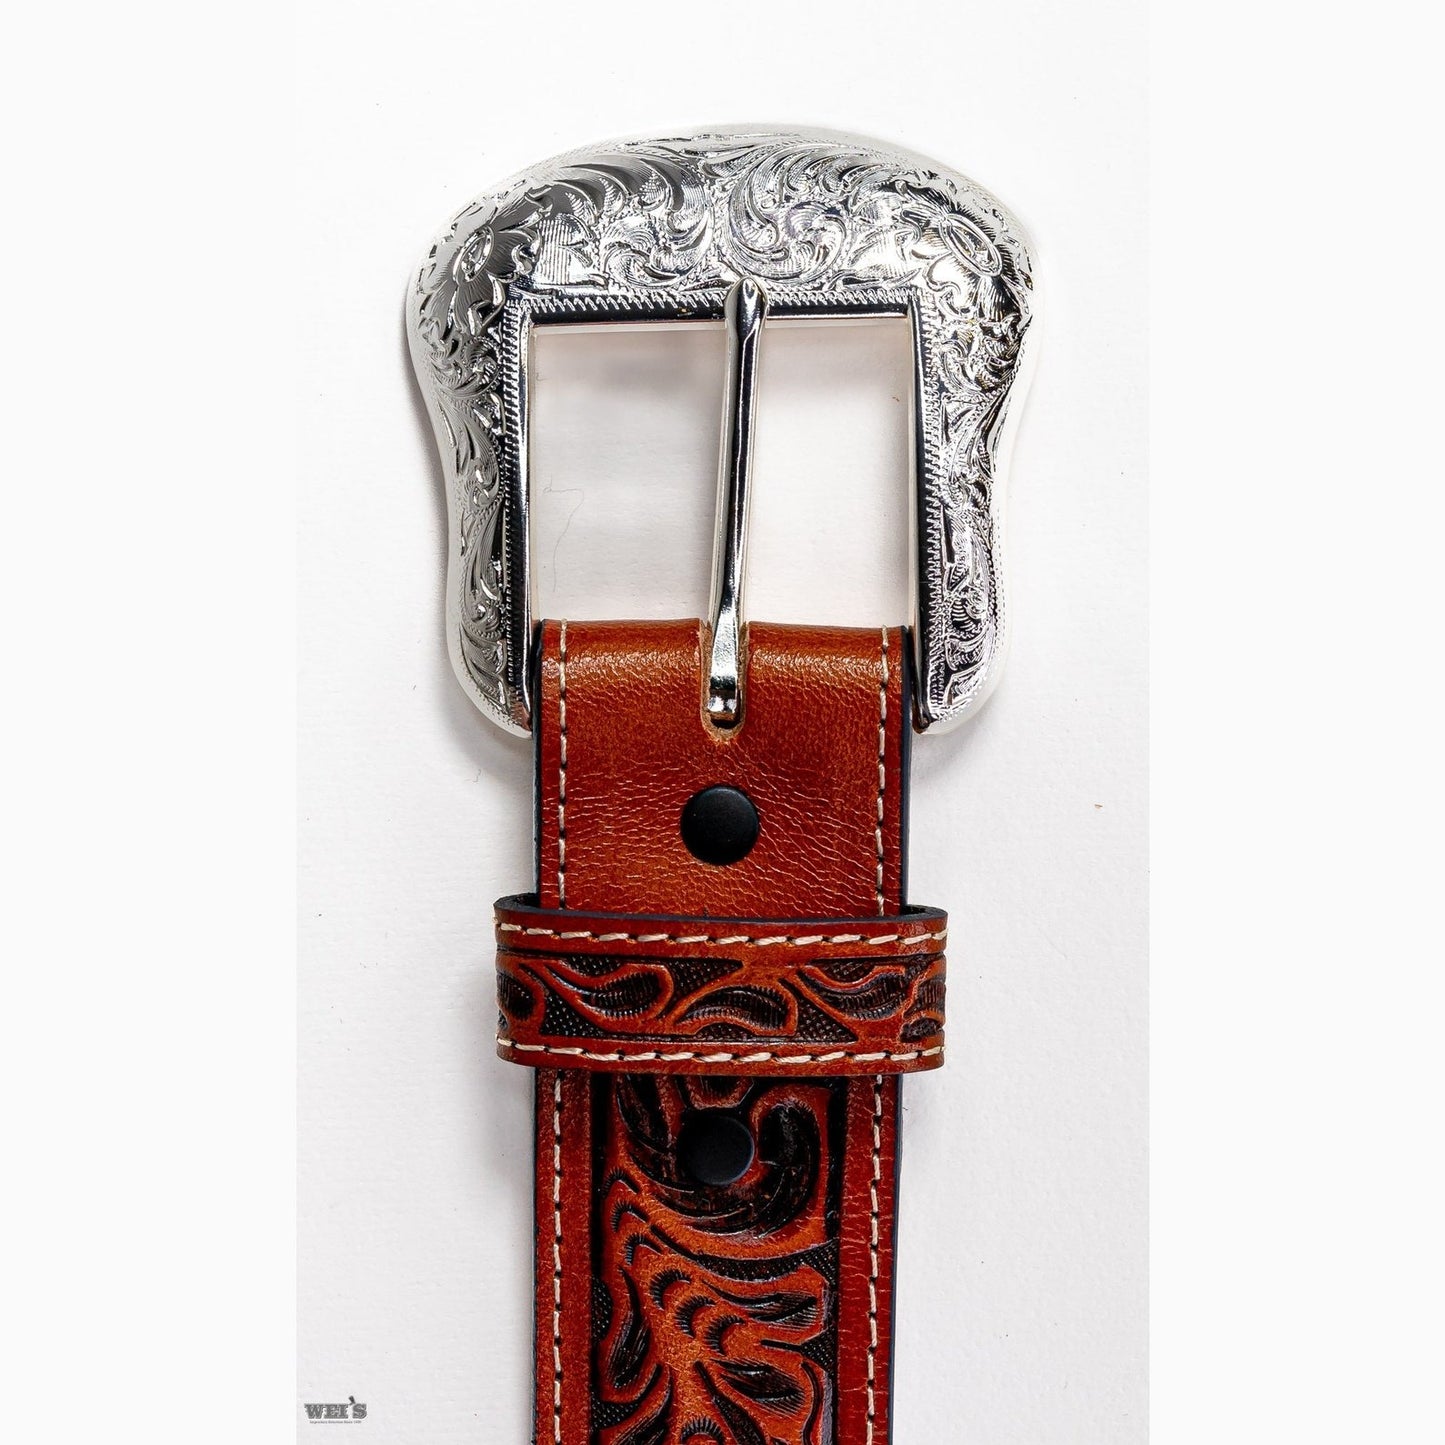 Men’s Belt Made By Ranger Belt Co. Hand Tooled Turquoise Inlay WB2704A - Ranger Belt Co.